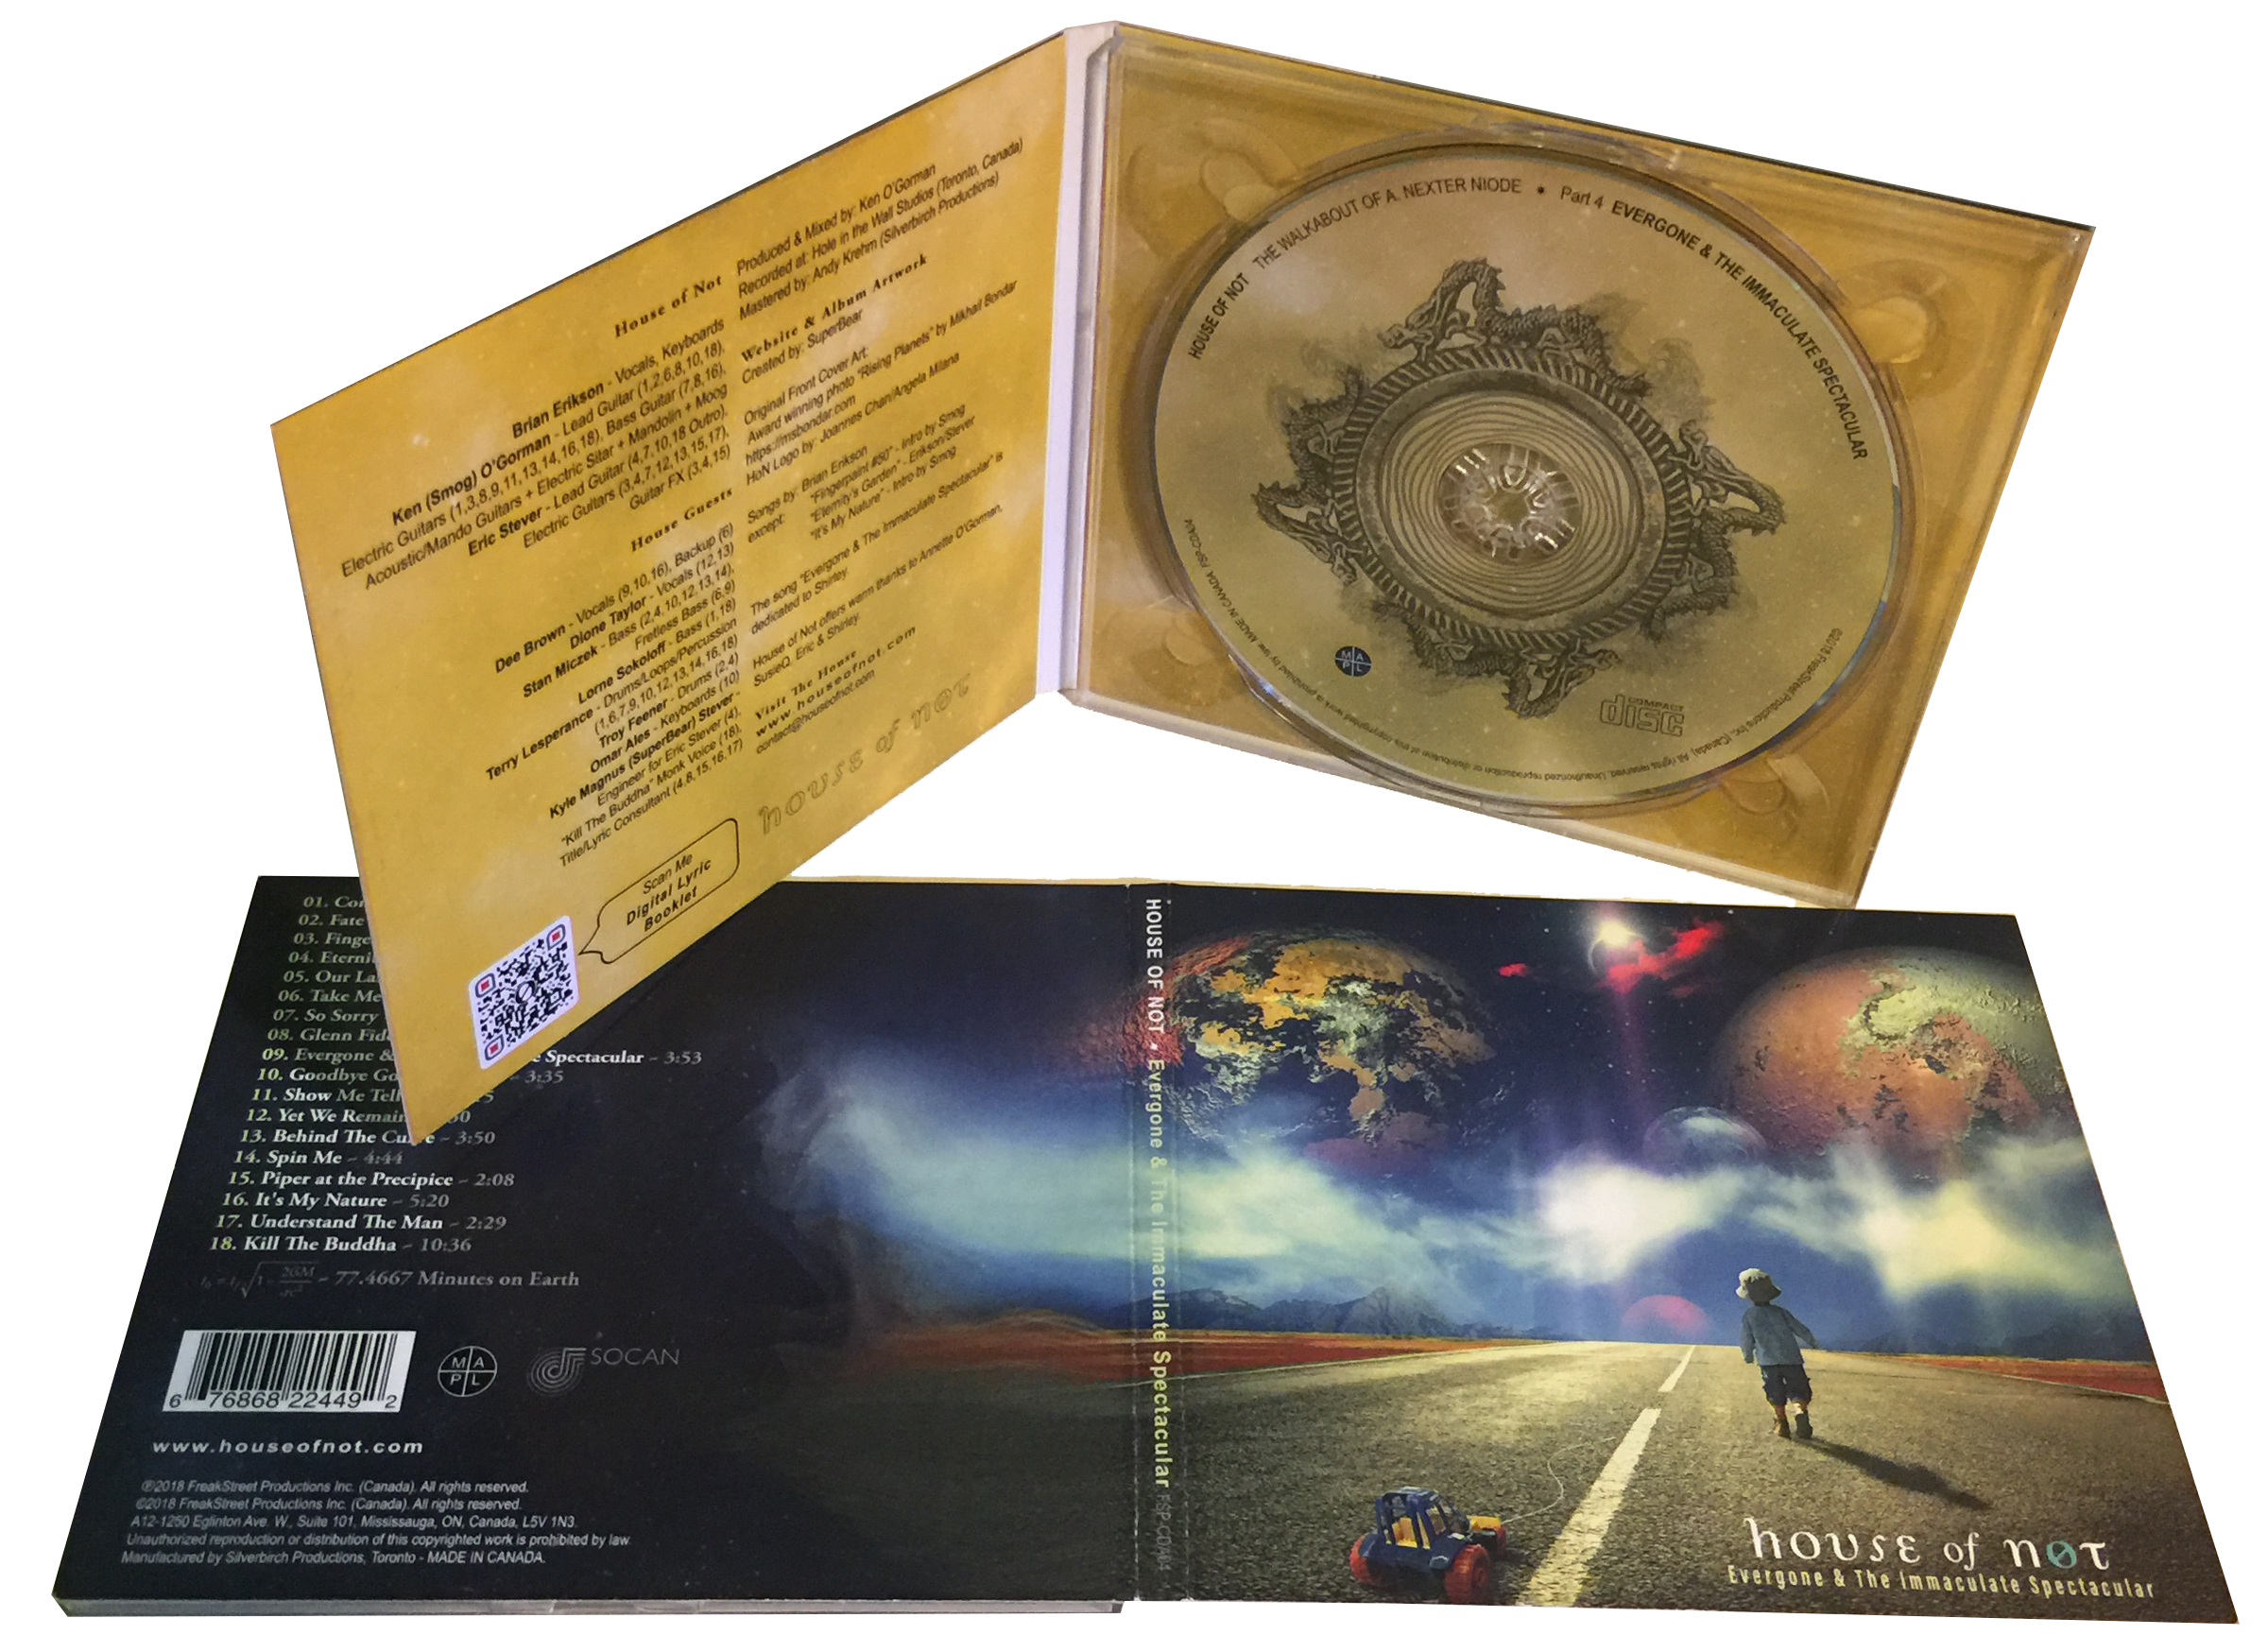 Image of the album "Evergone and The Immaculate Spectacular" in Digipak CD format